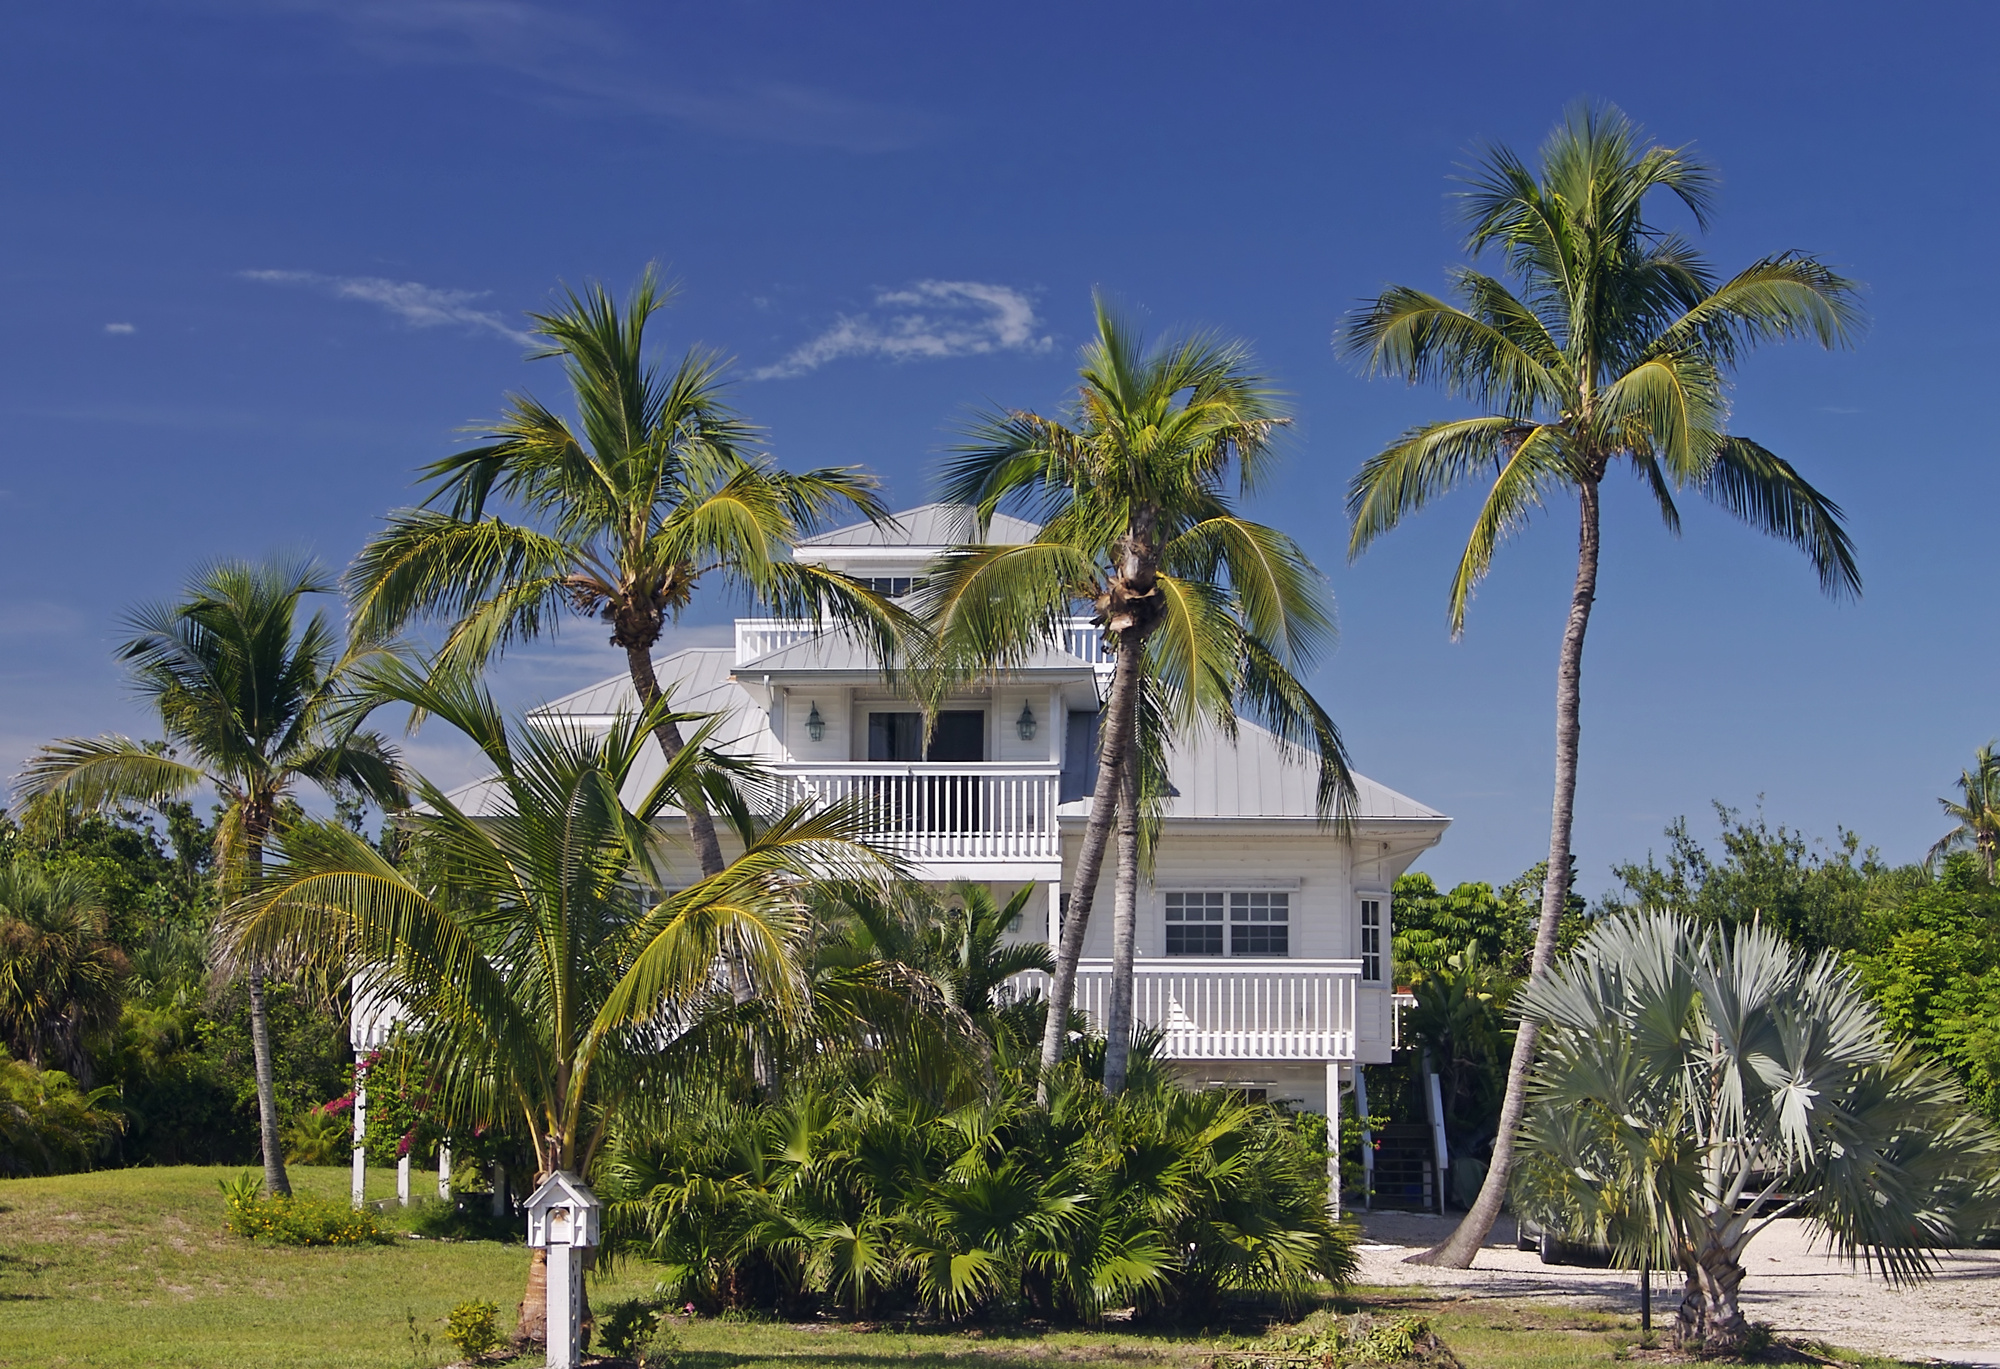 Great Buying A Vacation Home In The Bahamas of the decade The ultimate guide 